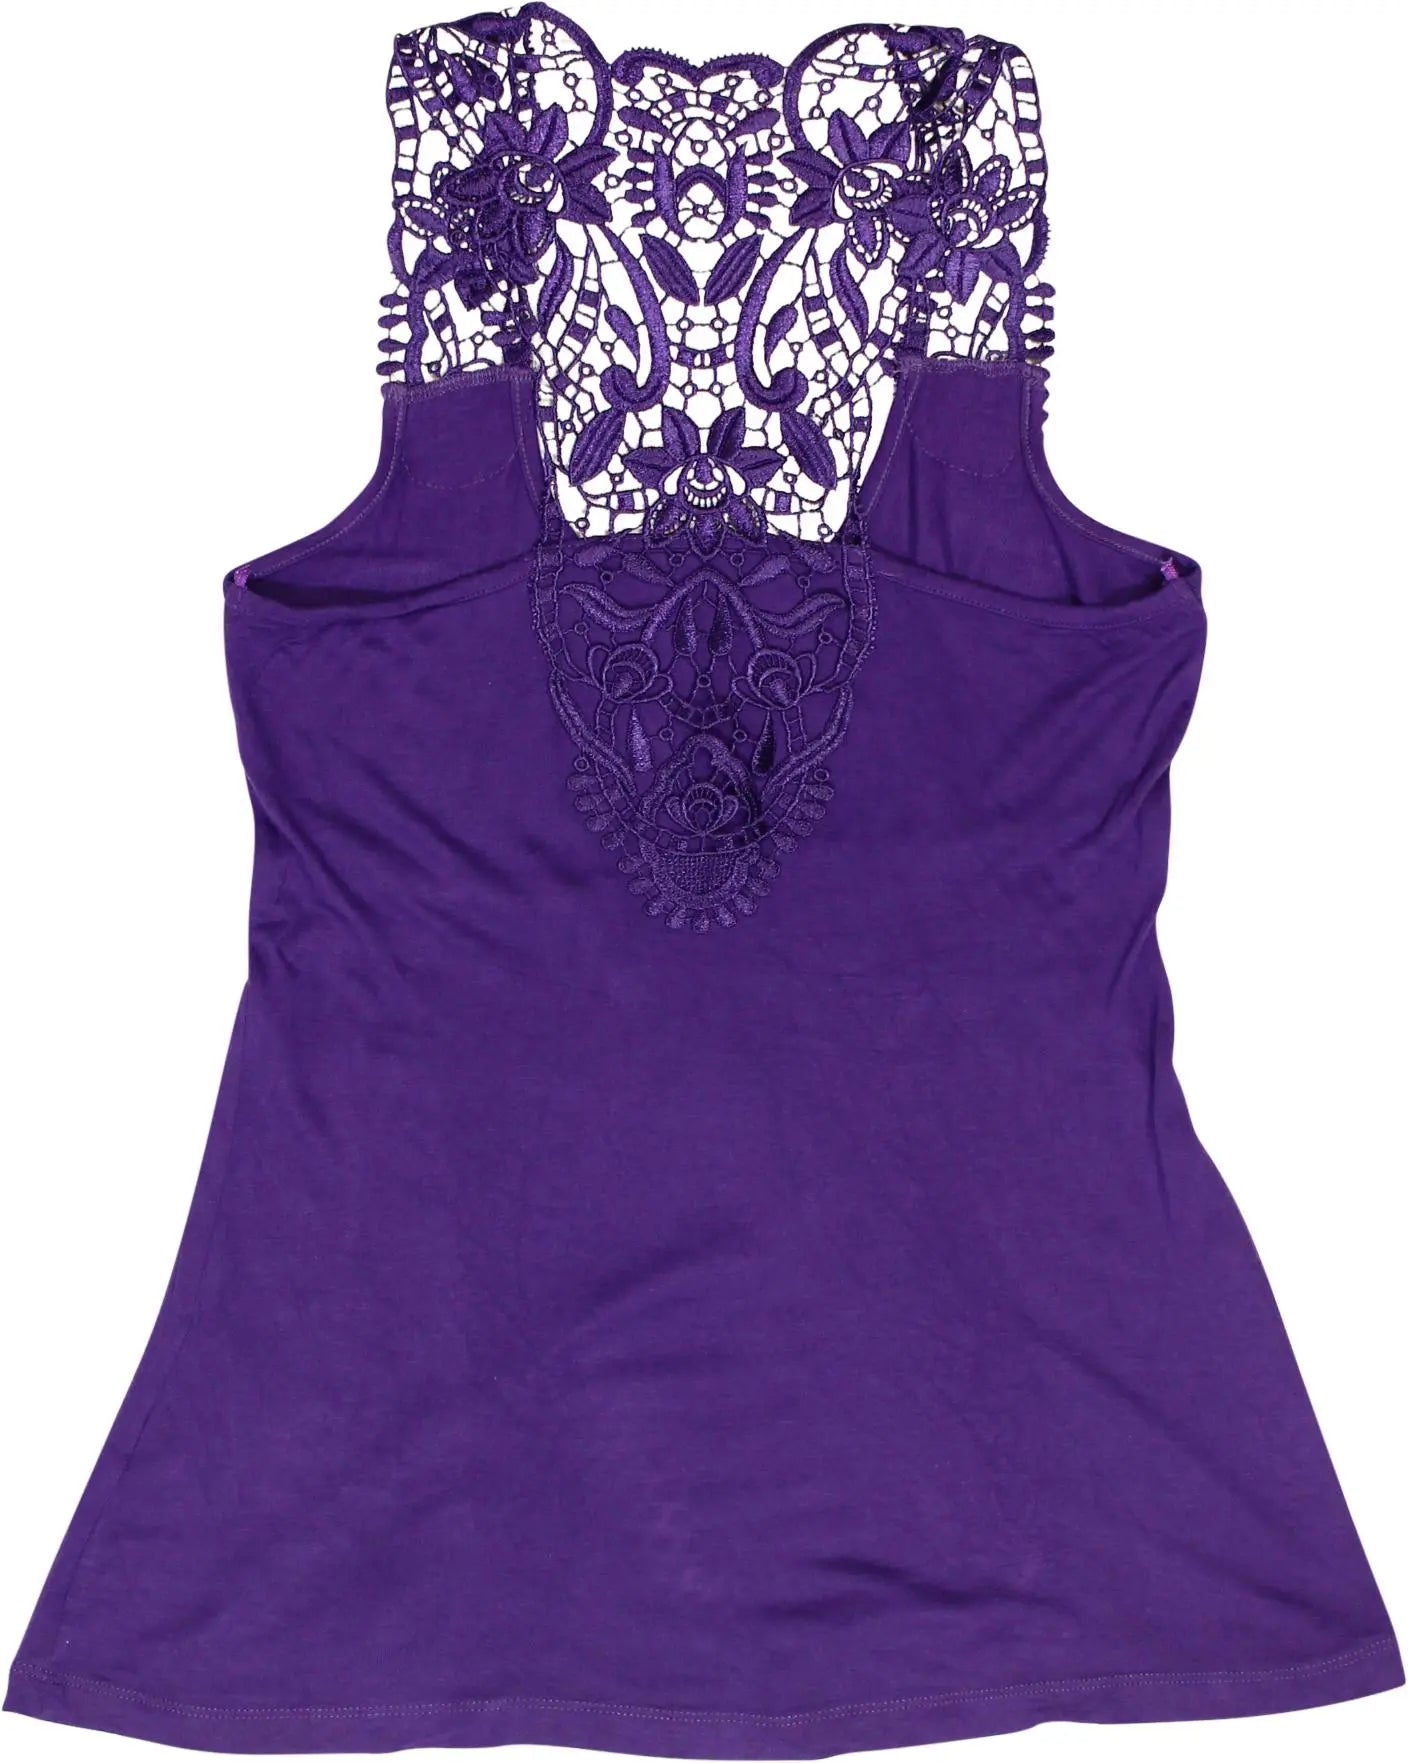 C&A - Purple Top- ThriftTale.com - Vintage and second handclothing